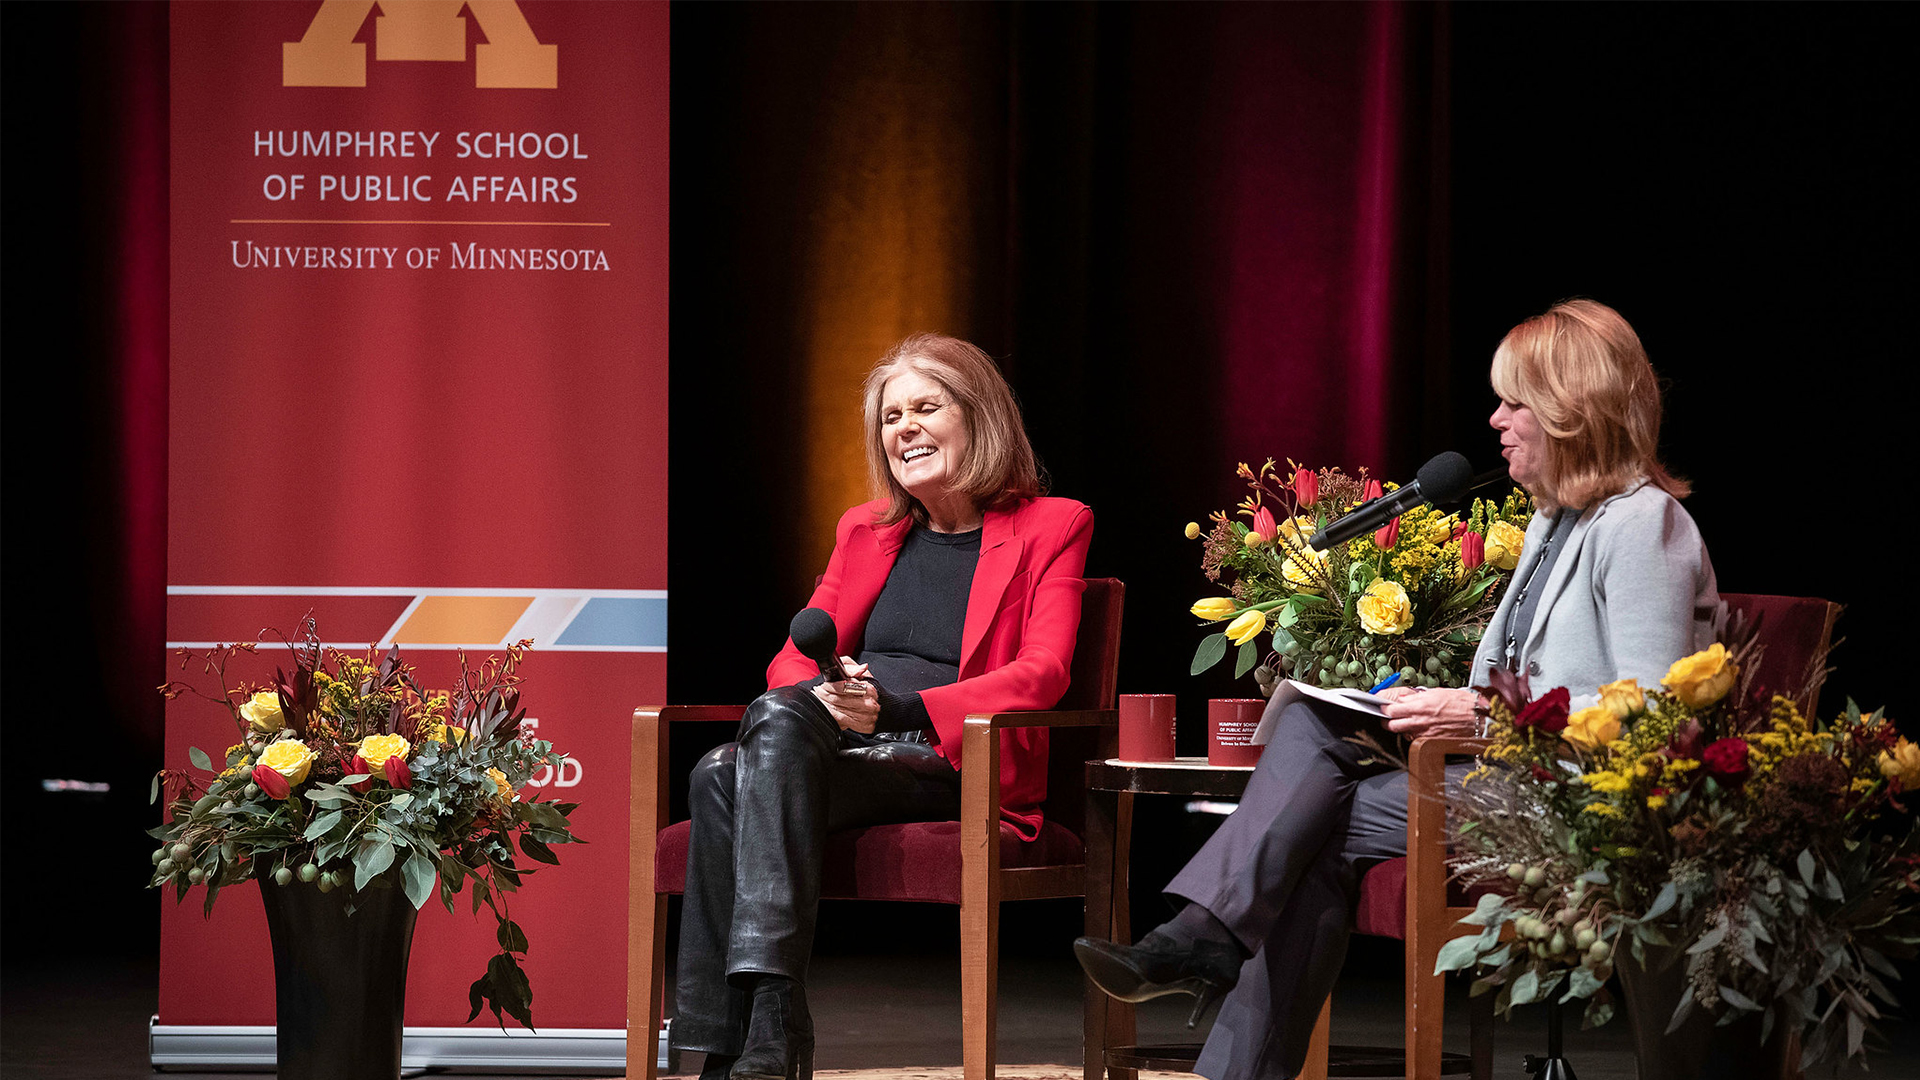 Gloria Steinem and Kerri Miller in conversation onstage with the Humphrey School logo in the background